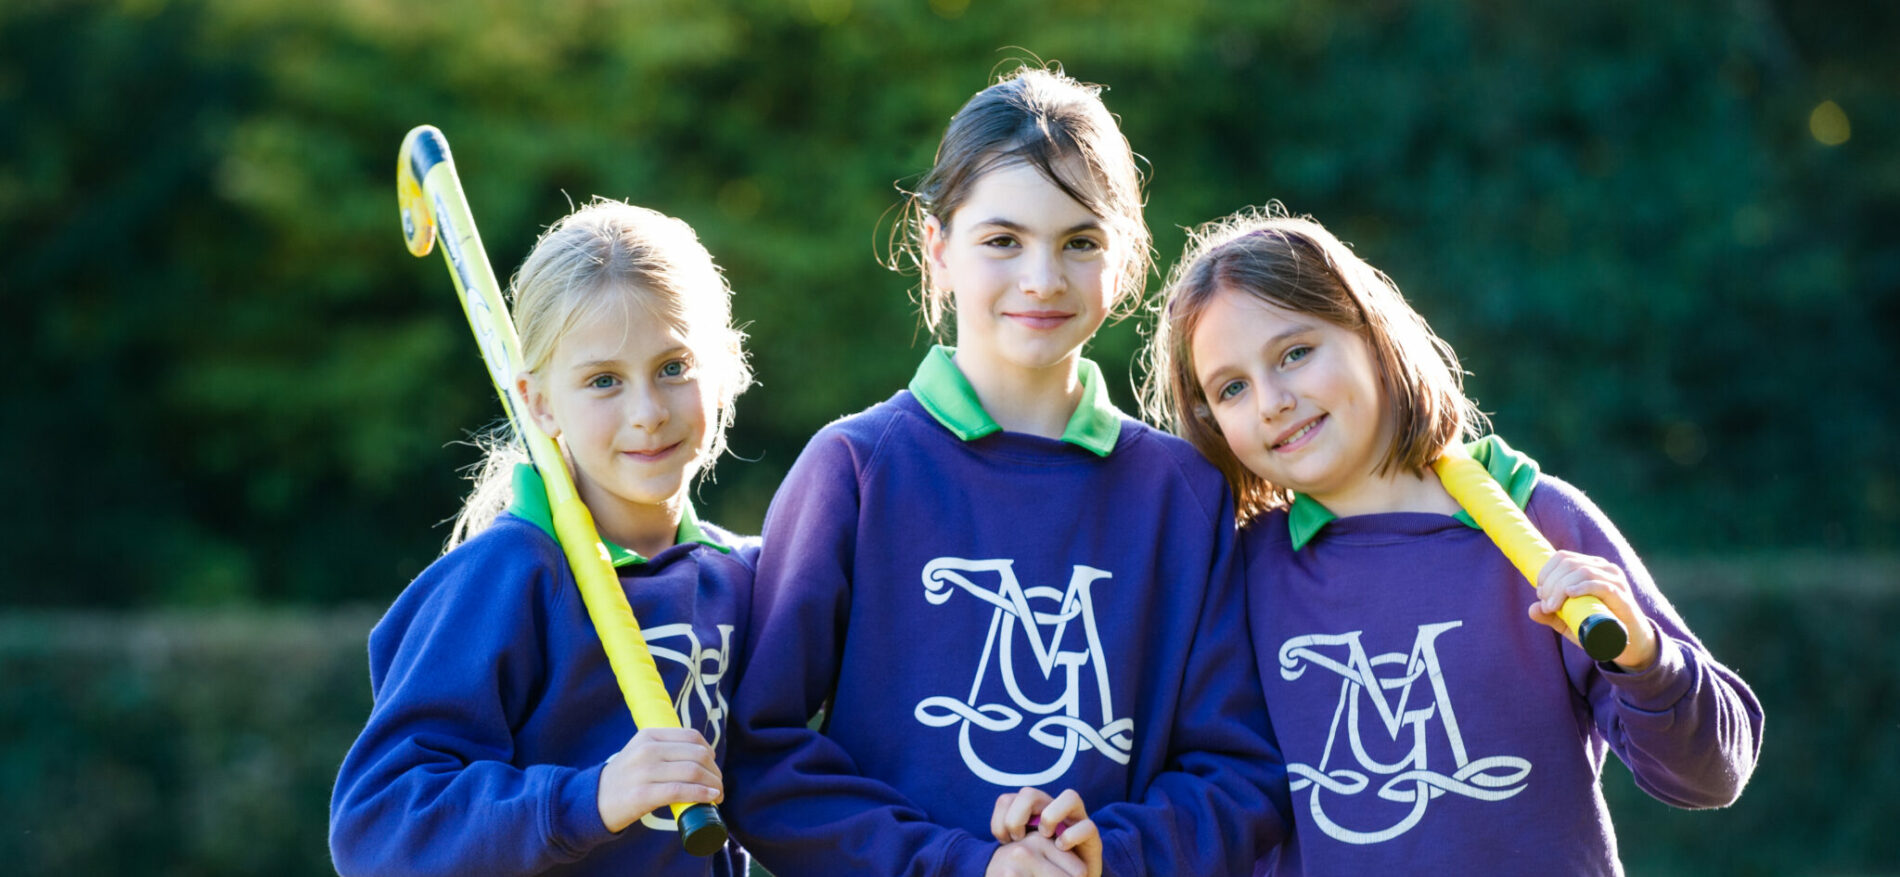 3 girls holding hockey sticks looking at the camera and smiling, sanding on a hockey field.